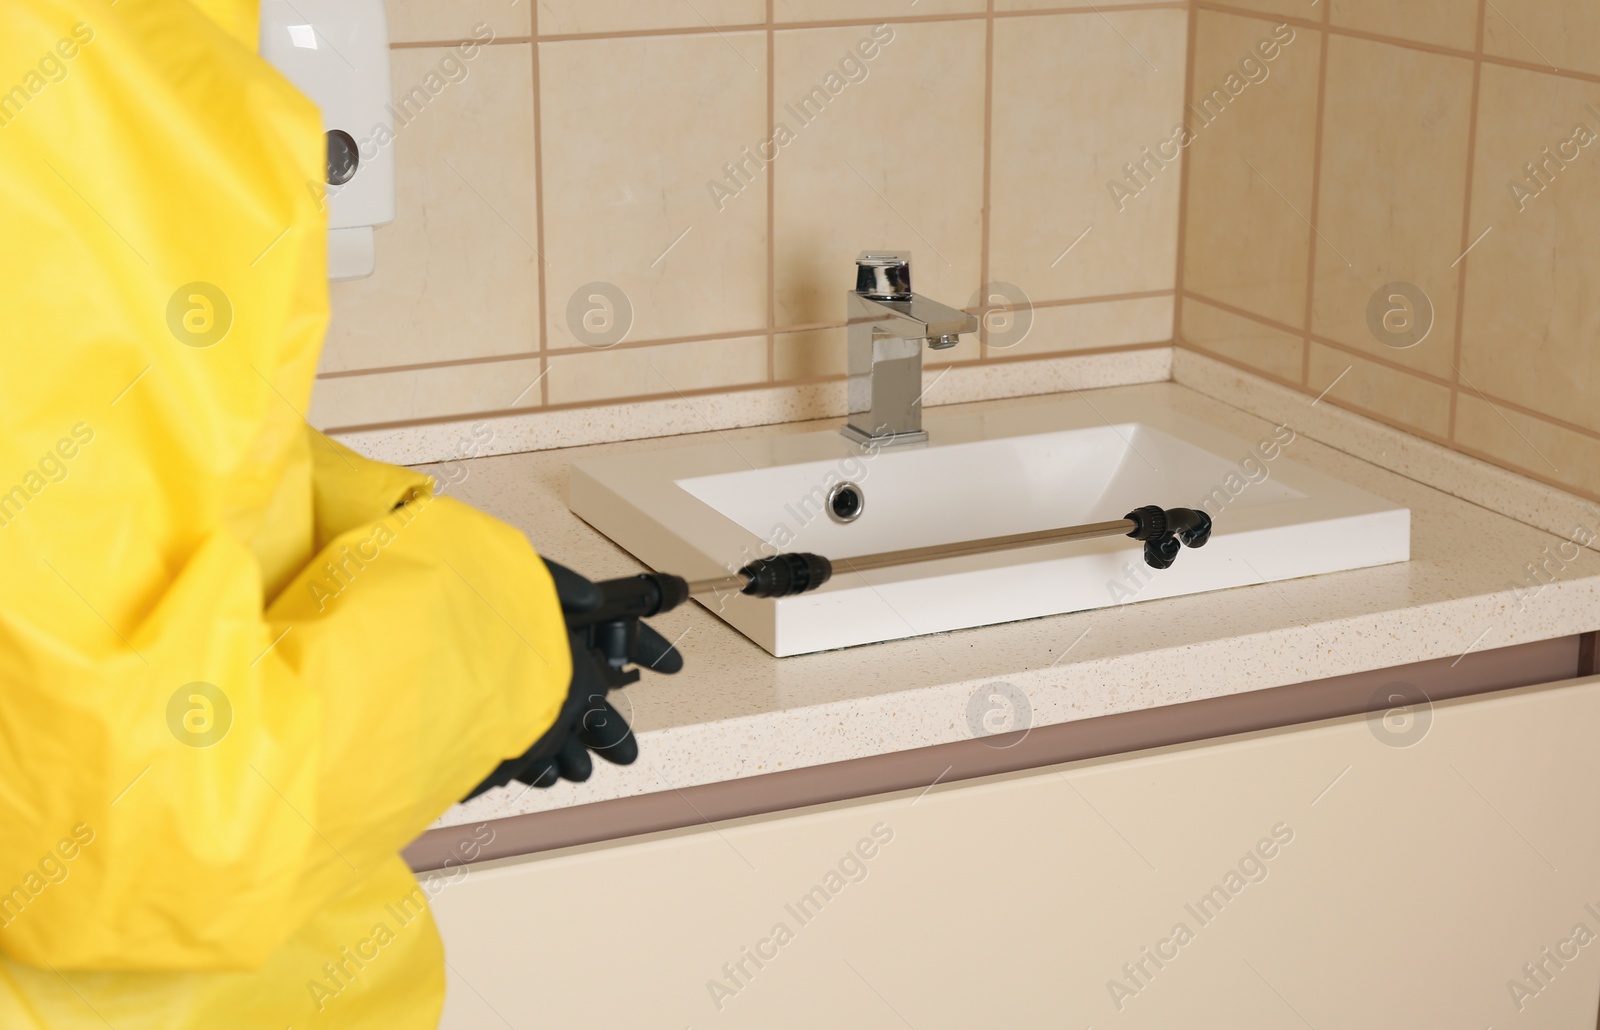 Photo of Pest control worker spraying pesticide near sink in restroom, closeup